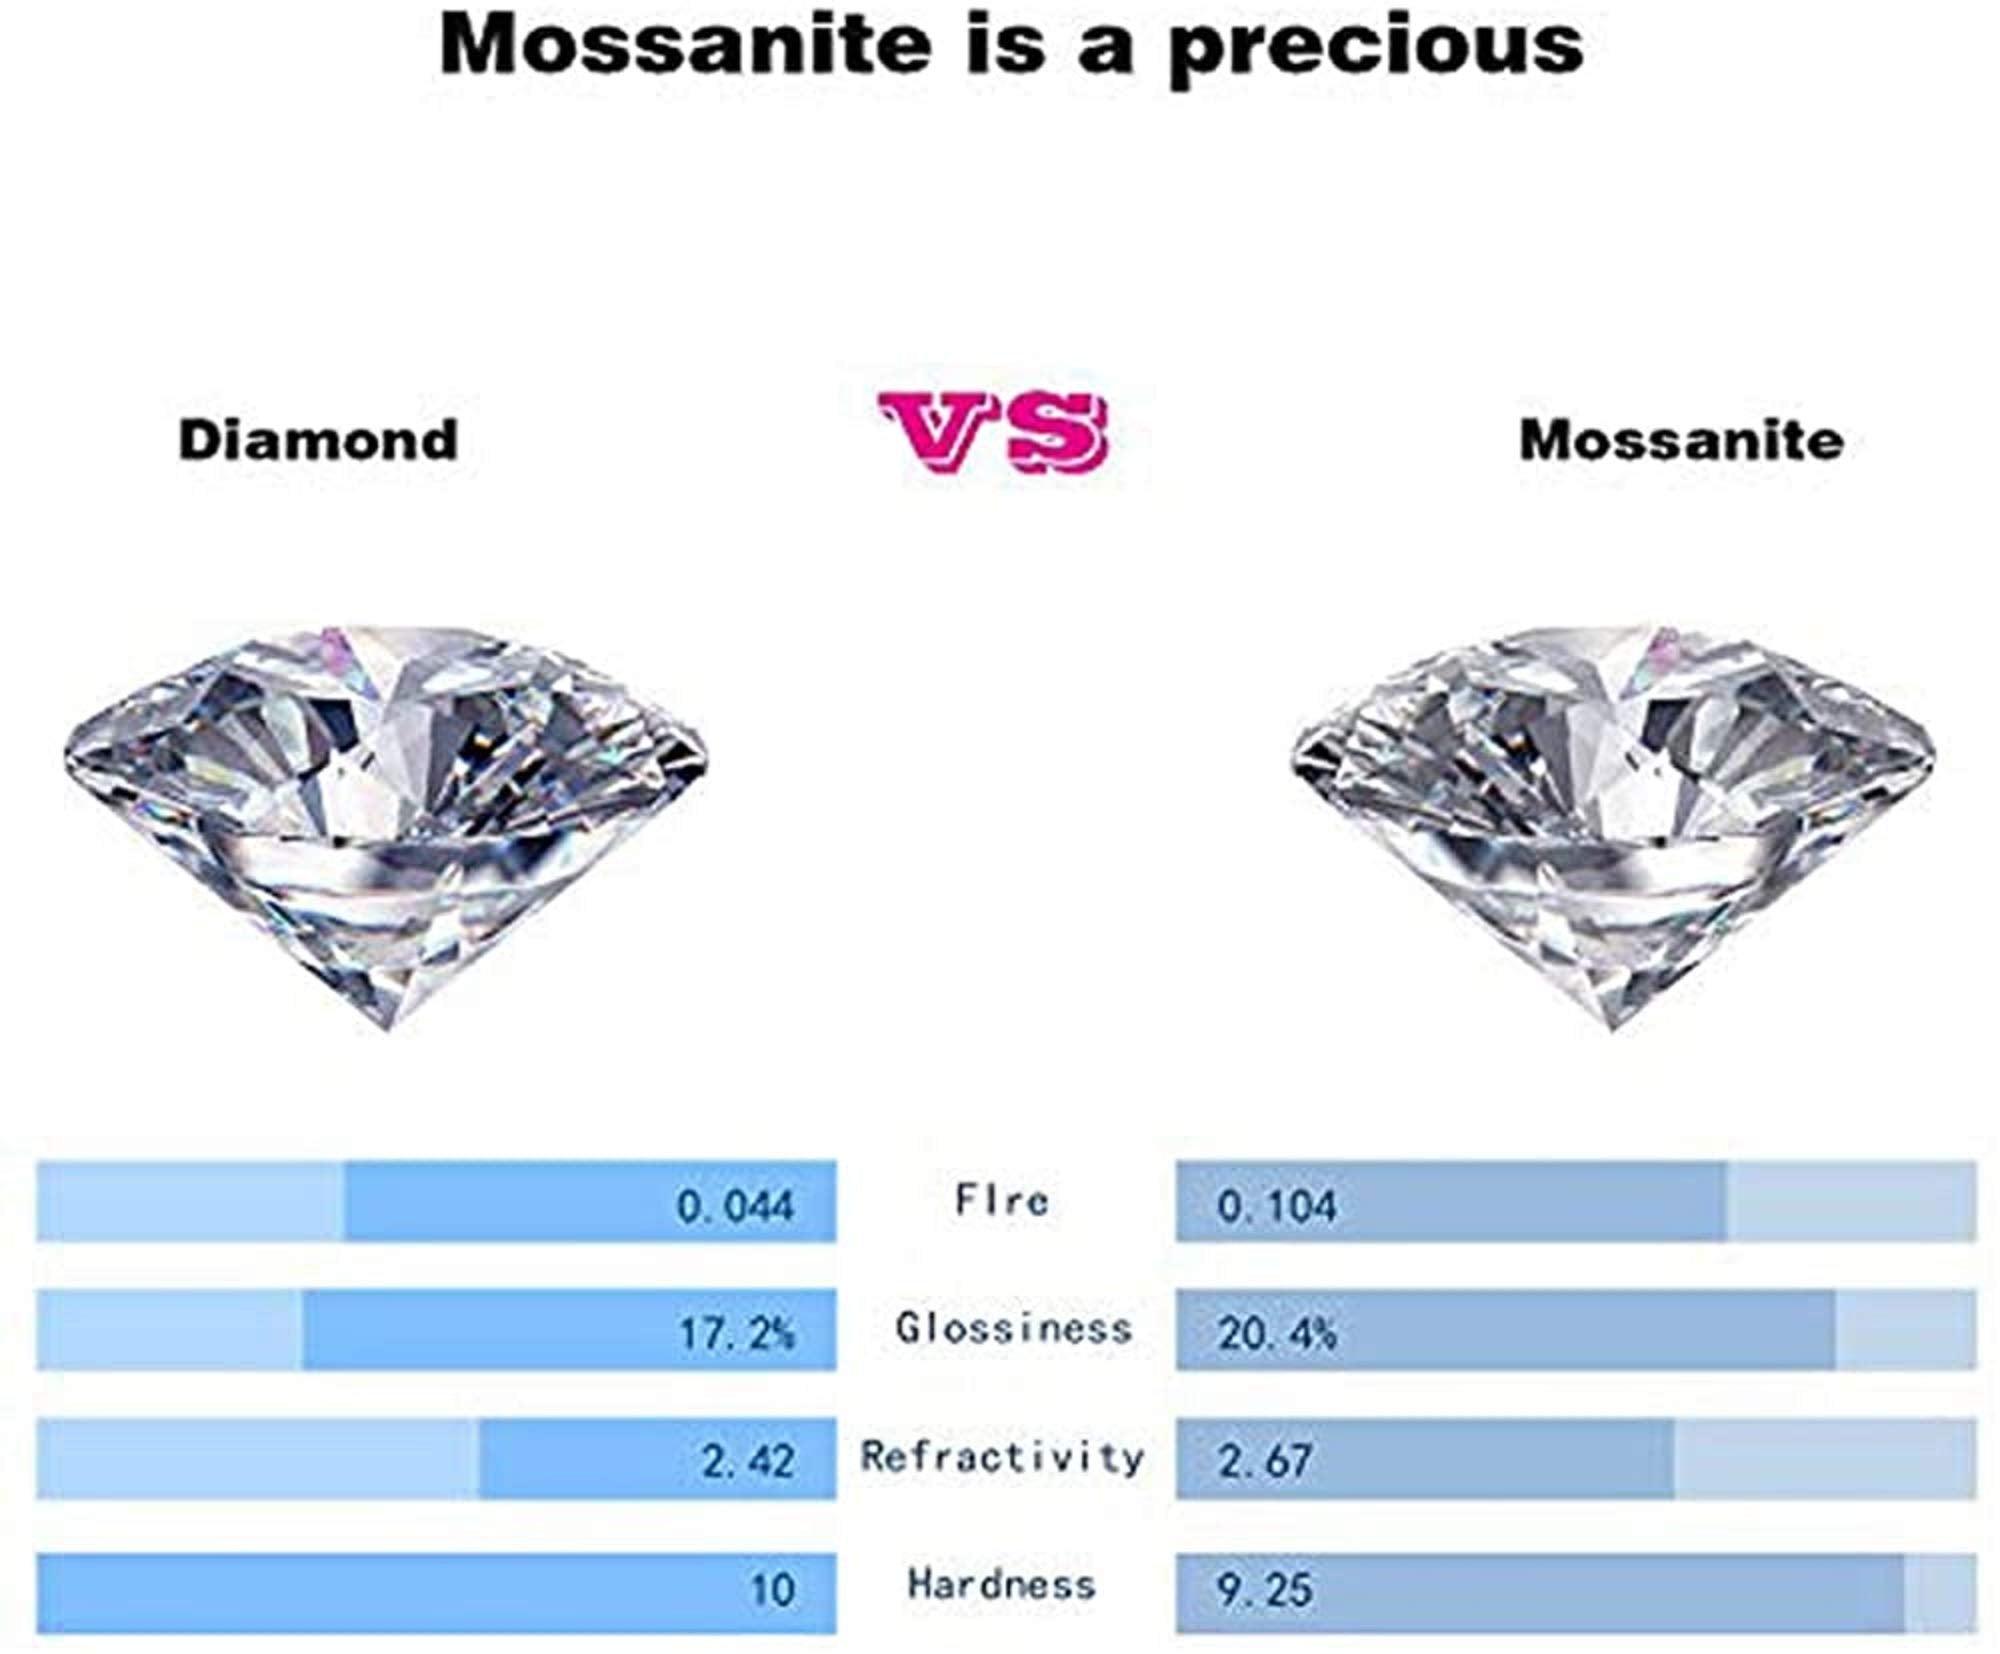 Marvelous Heart Prong 1 Carat D Color High Quality Moissanite Diamonds 14KPG Rings - Fine Jewellery - The Jewellery Supermarket